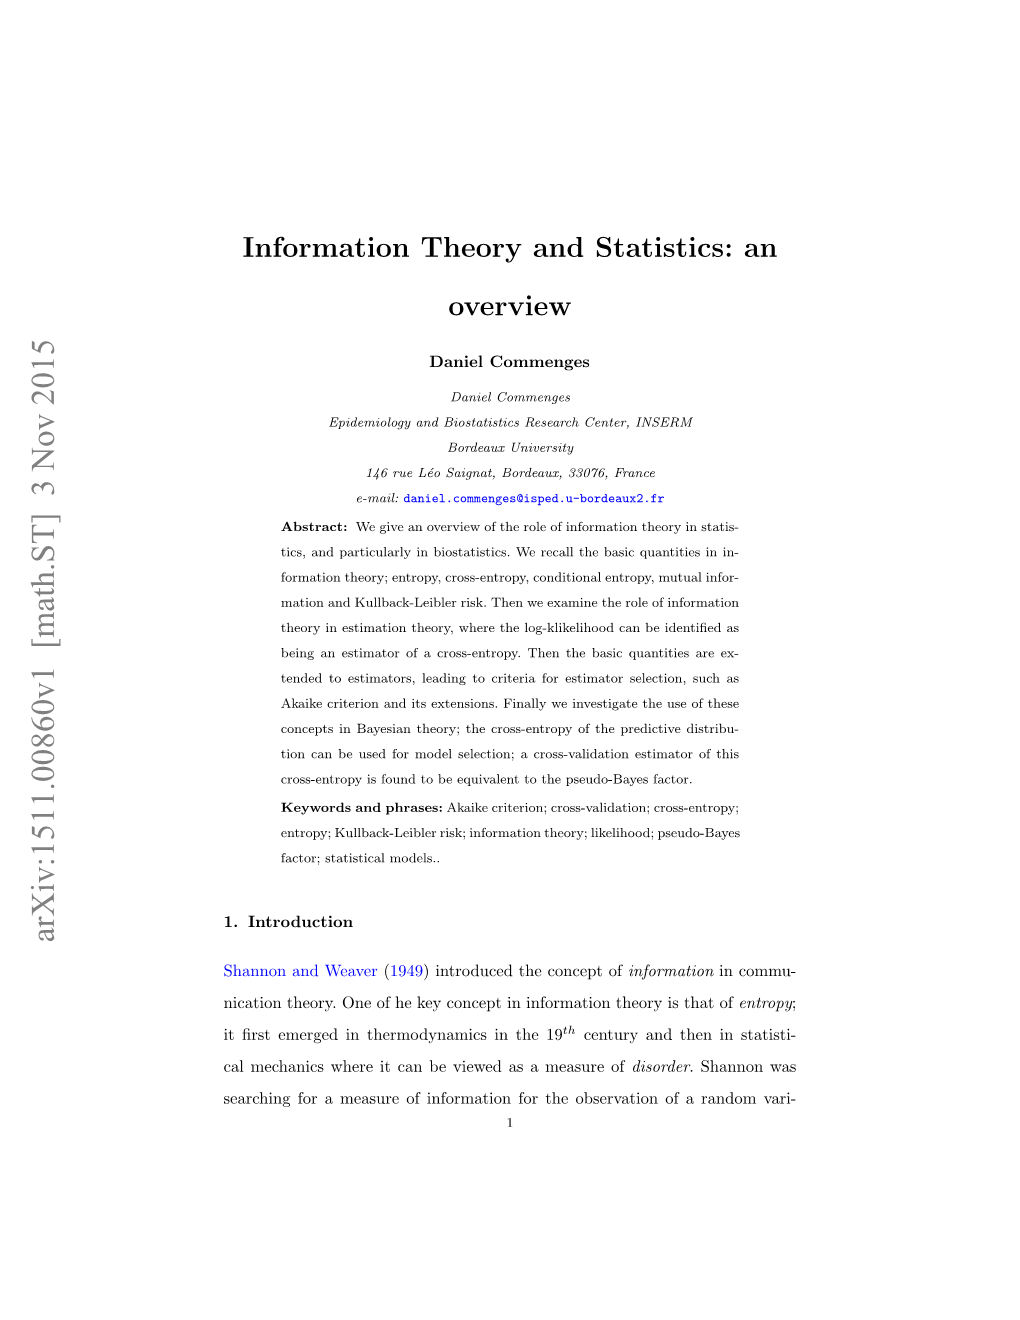 Information Theory and Statistics: an Overview